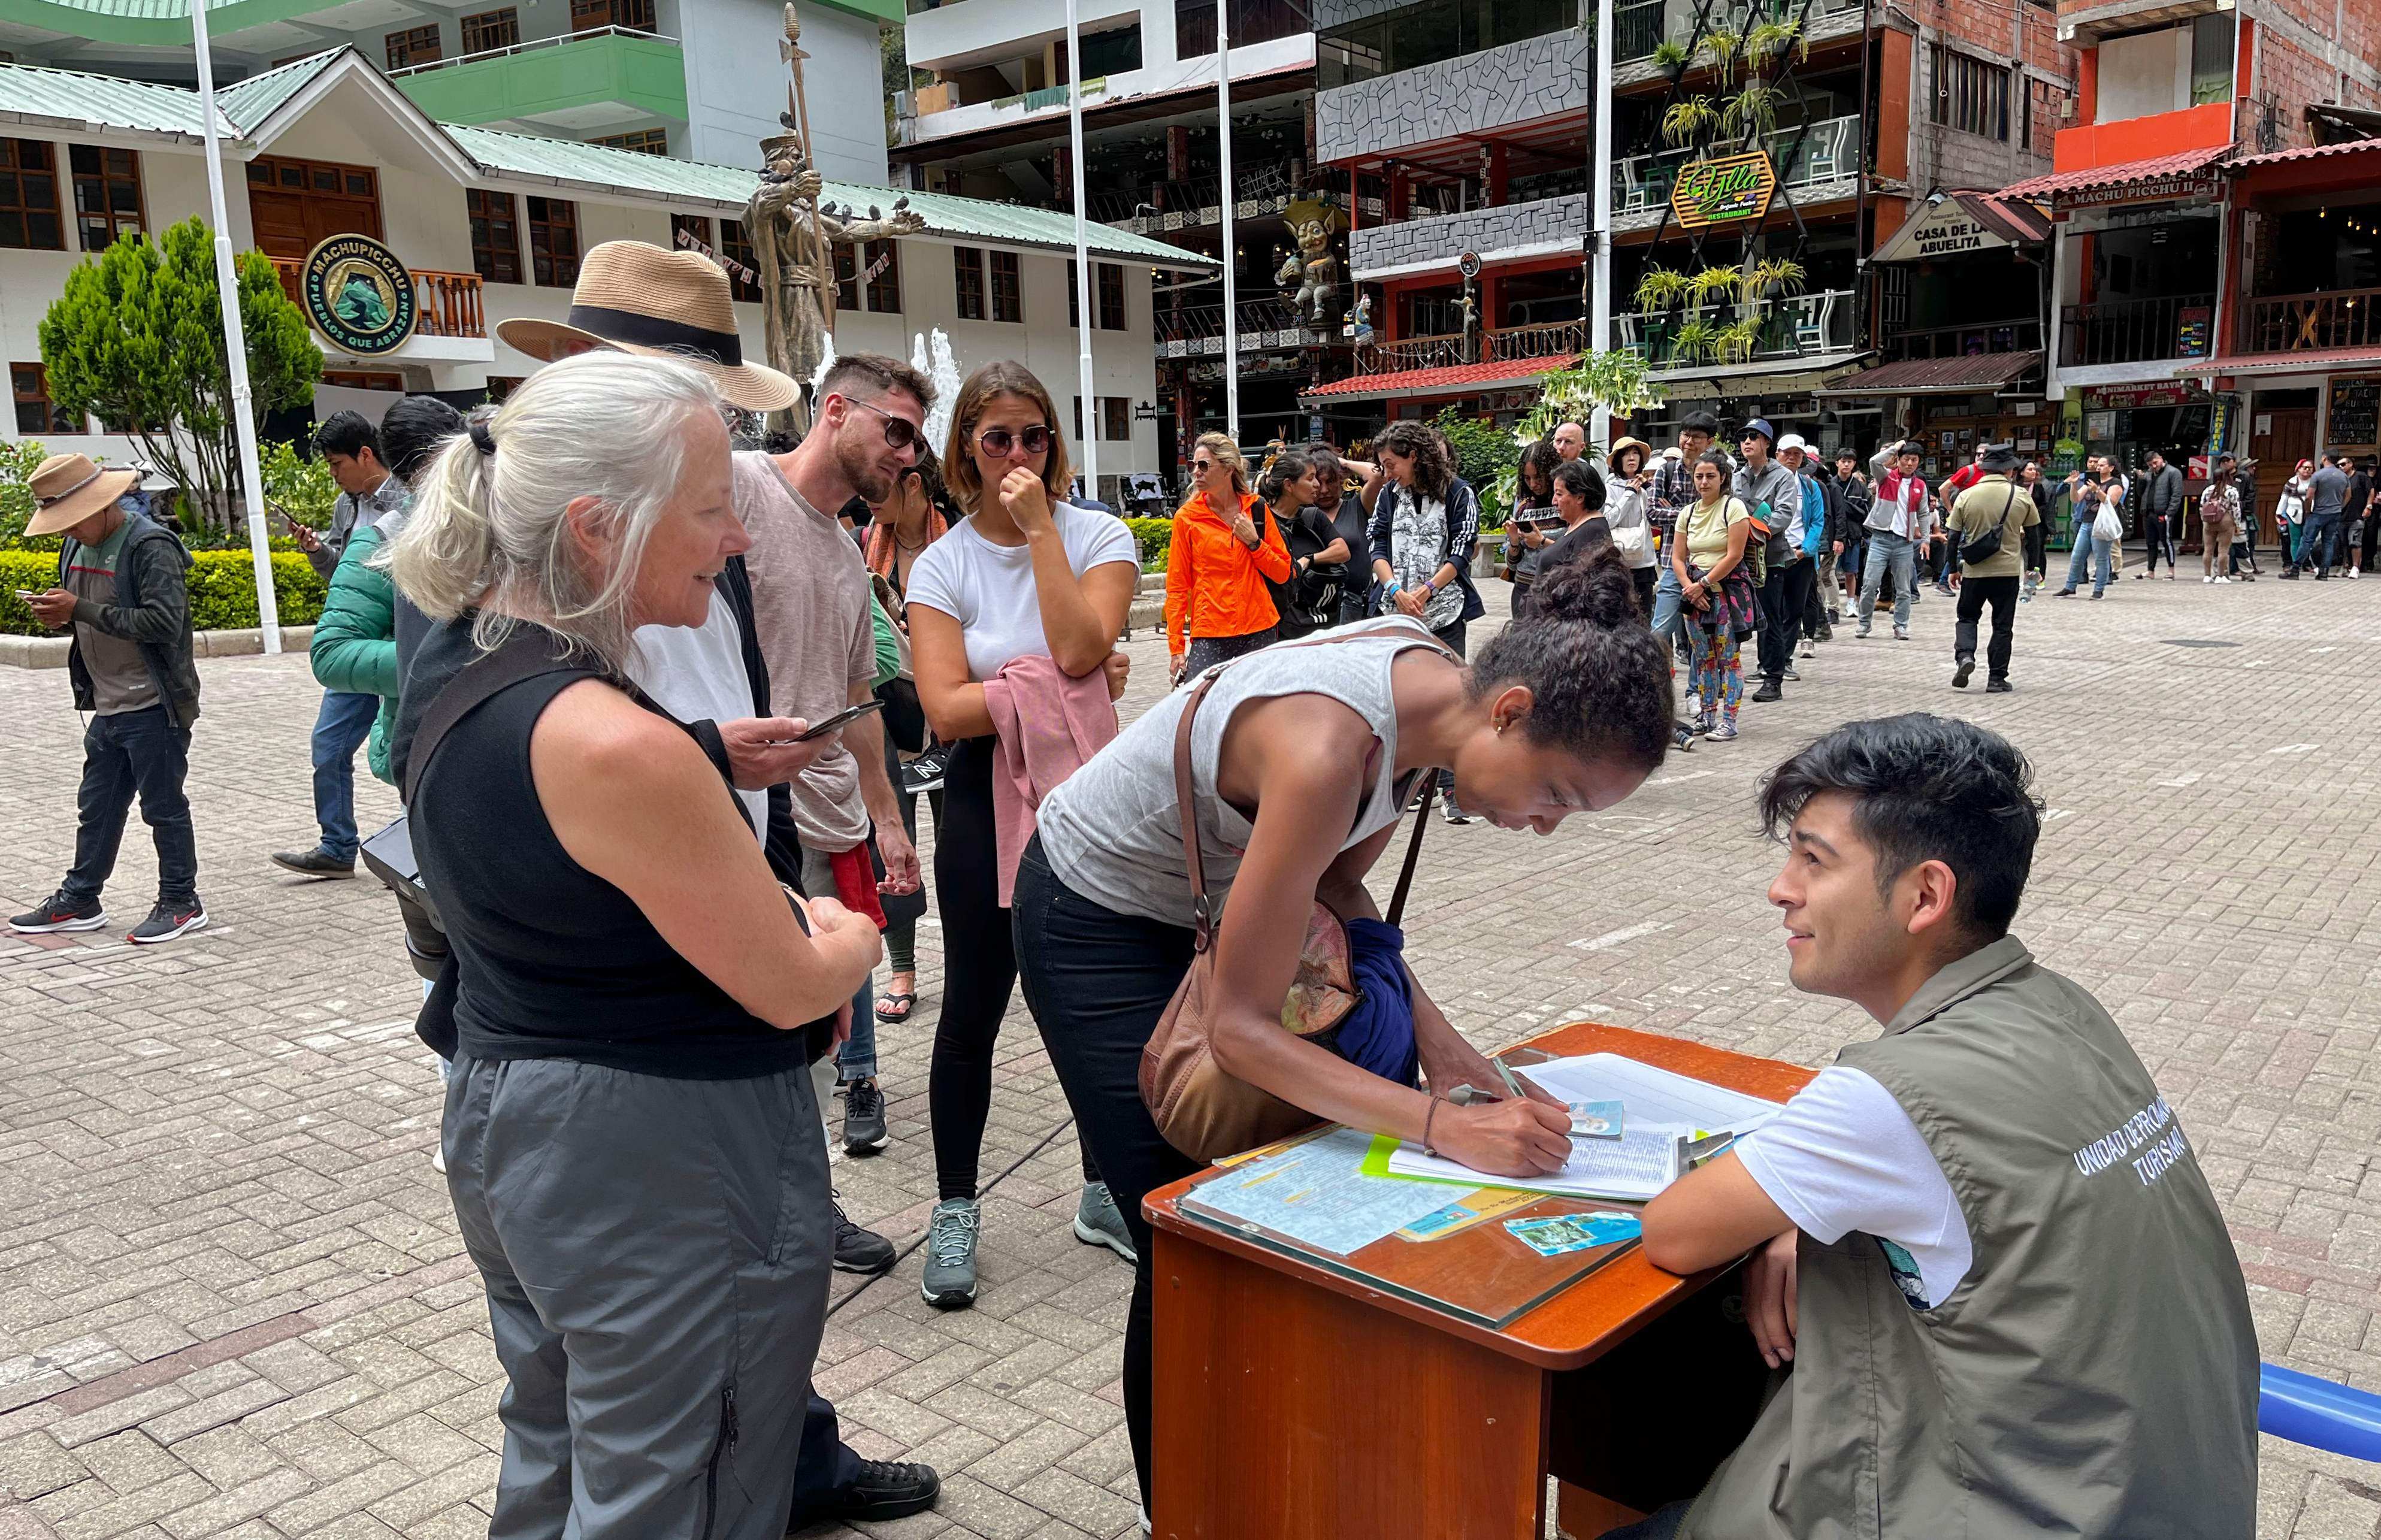 Tourists queue to sign a petition to the rail company to be evacuated on a “humanitary train” in Machu Picchu, Peru on Friday. Photo: AFP